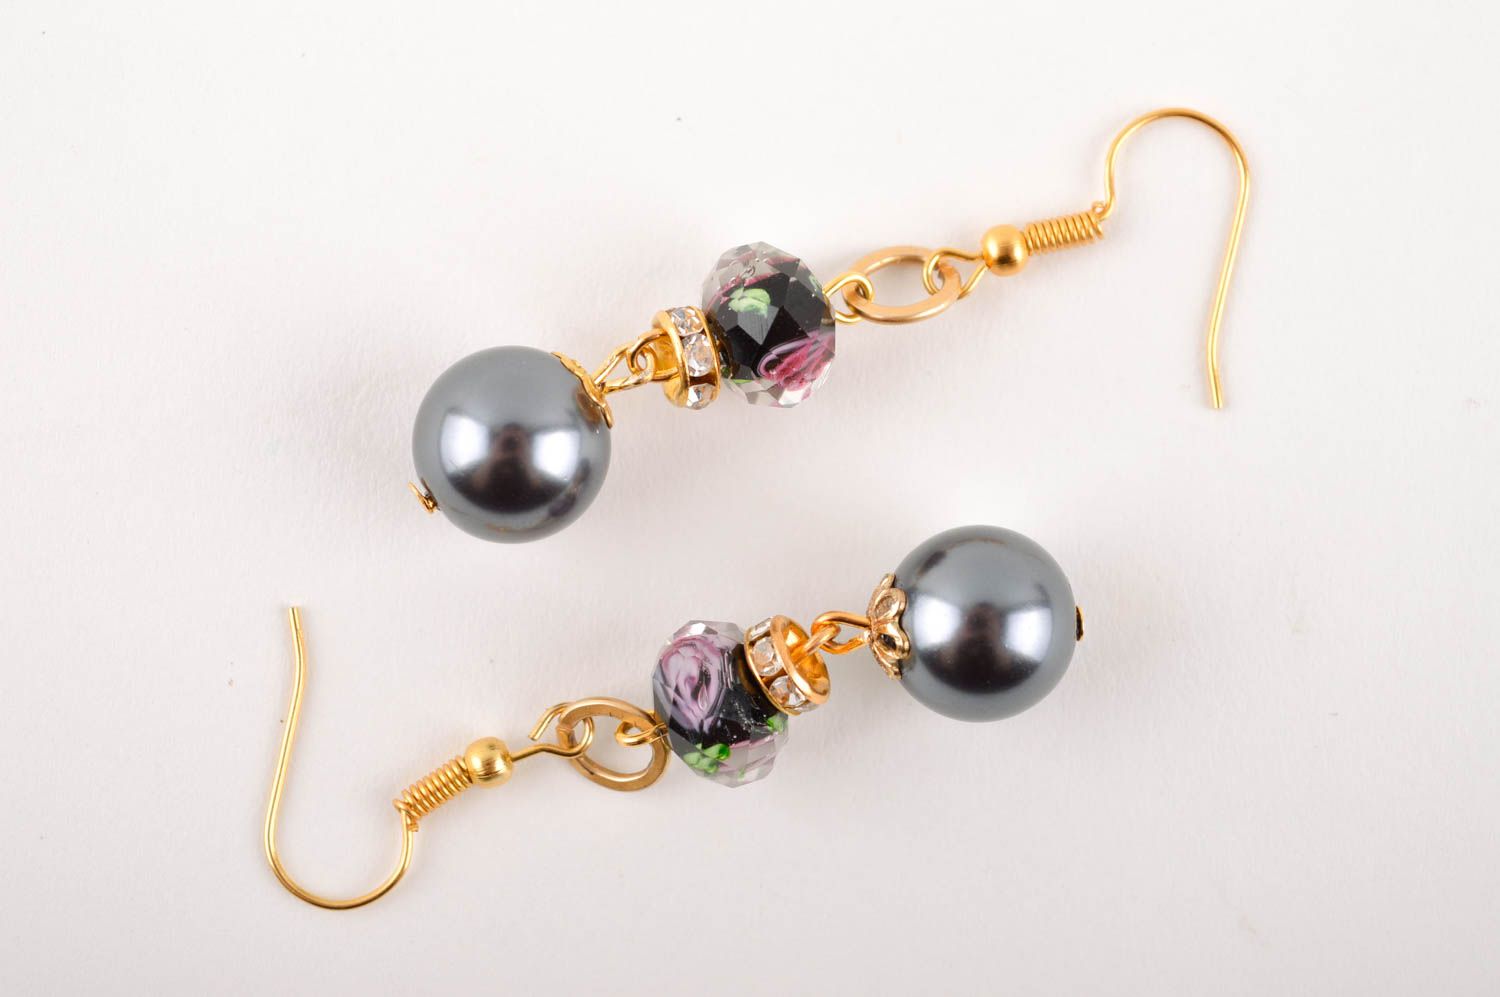 Handmade earrings with artificial pearls designer accessories fashion jewelry photo 5